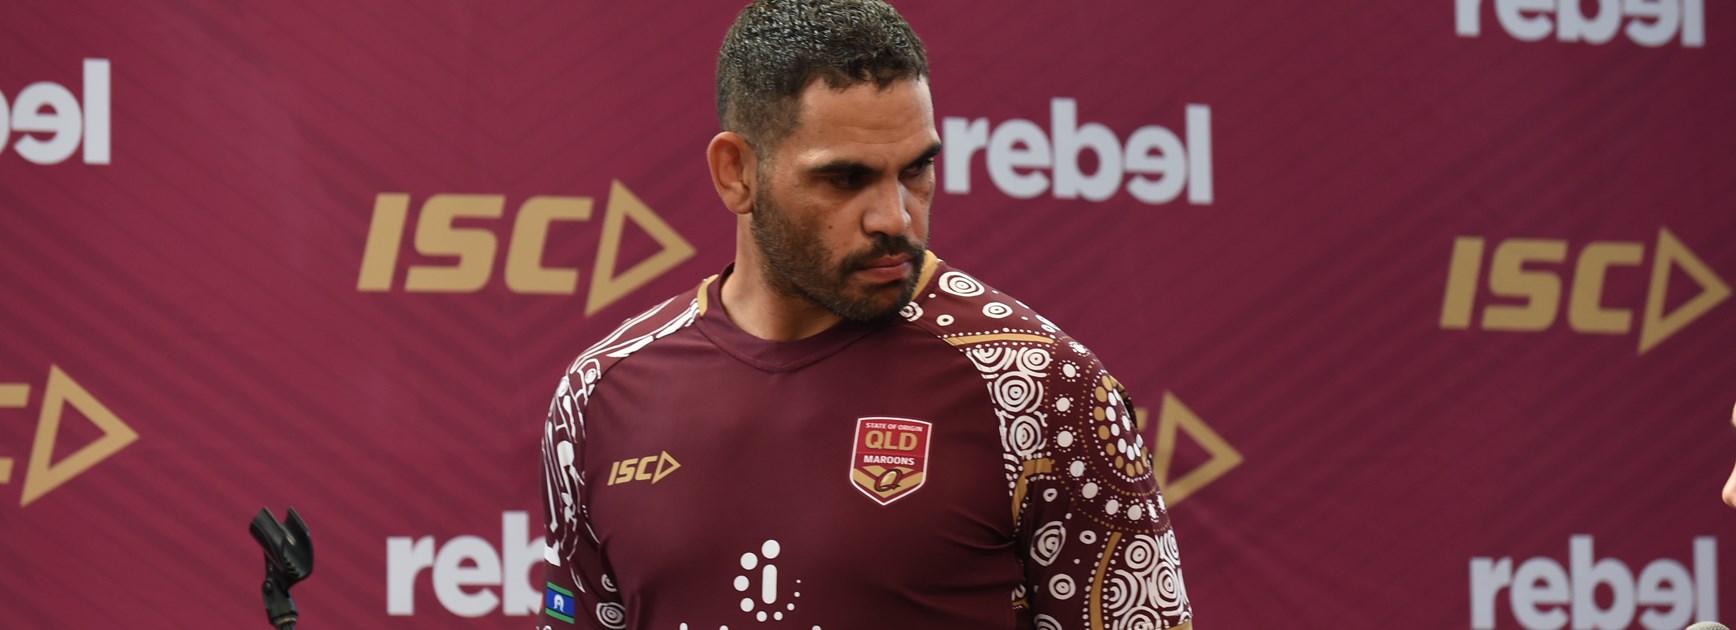 Opportunity for Indigenous artists to leave mark on Maroons